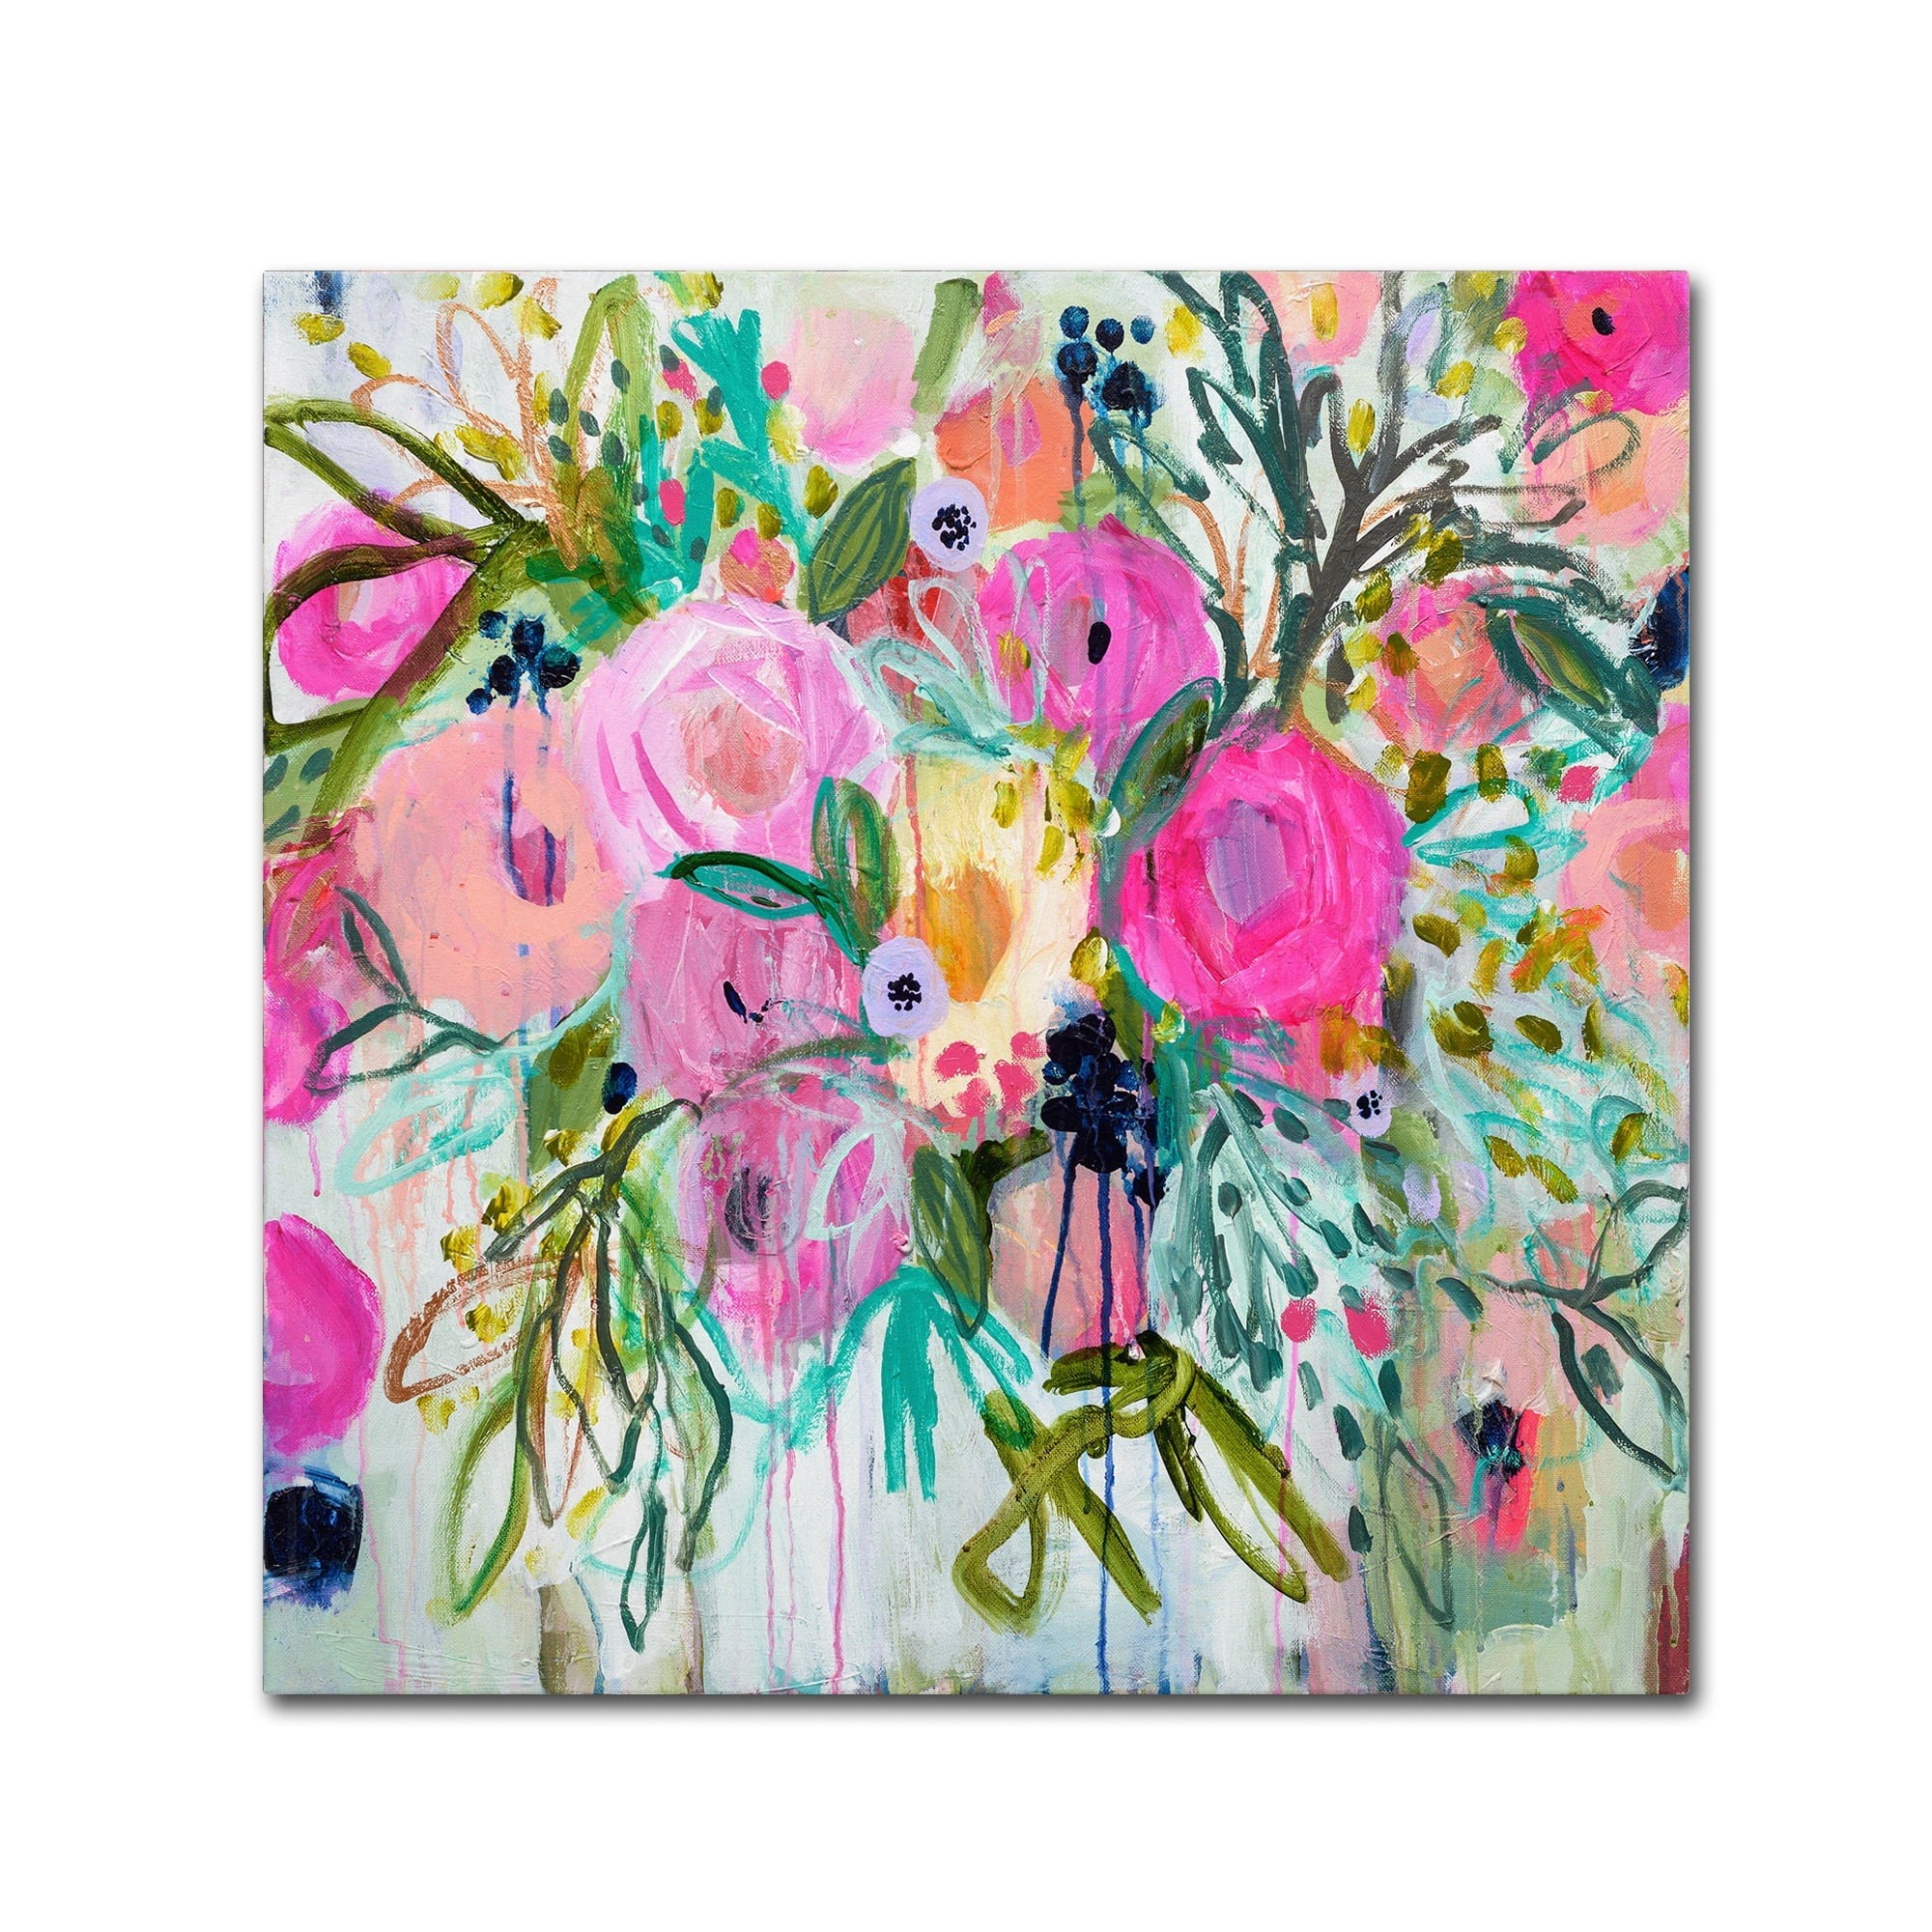 the flower painting with bright pinks and greens